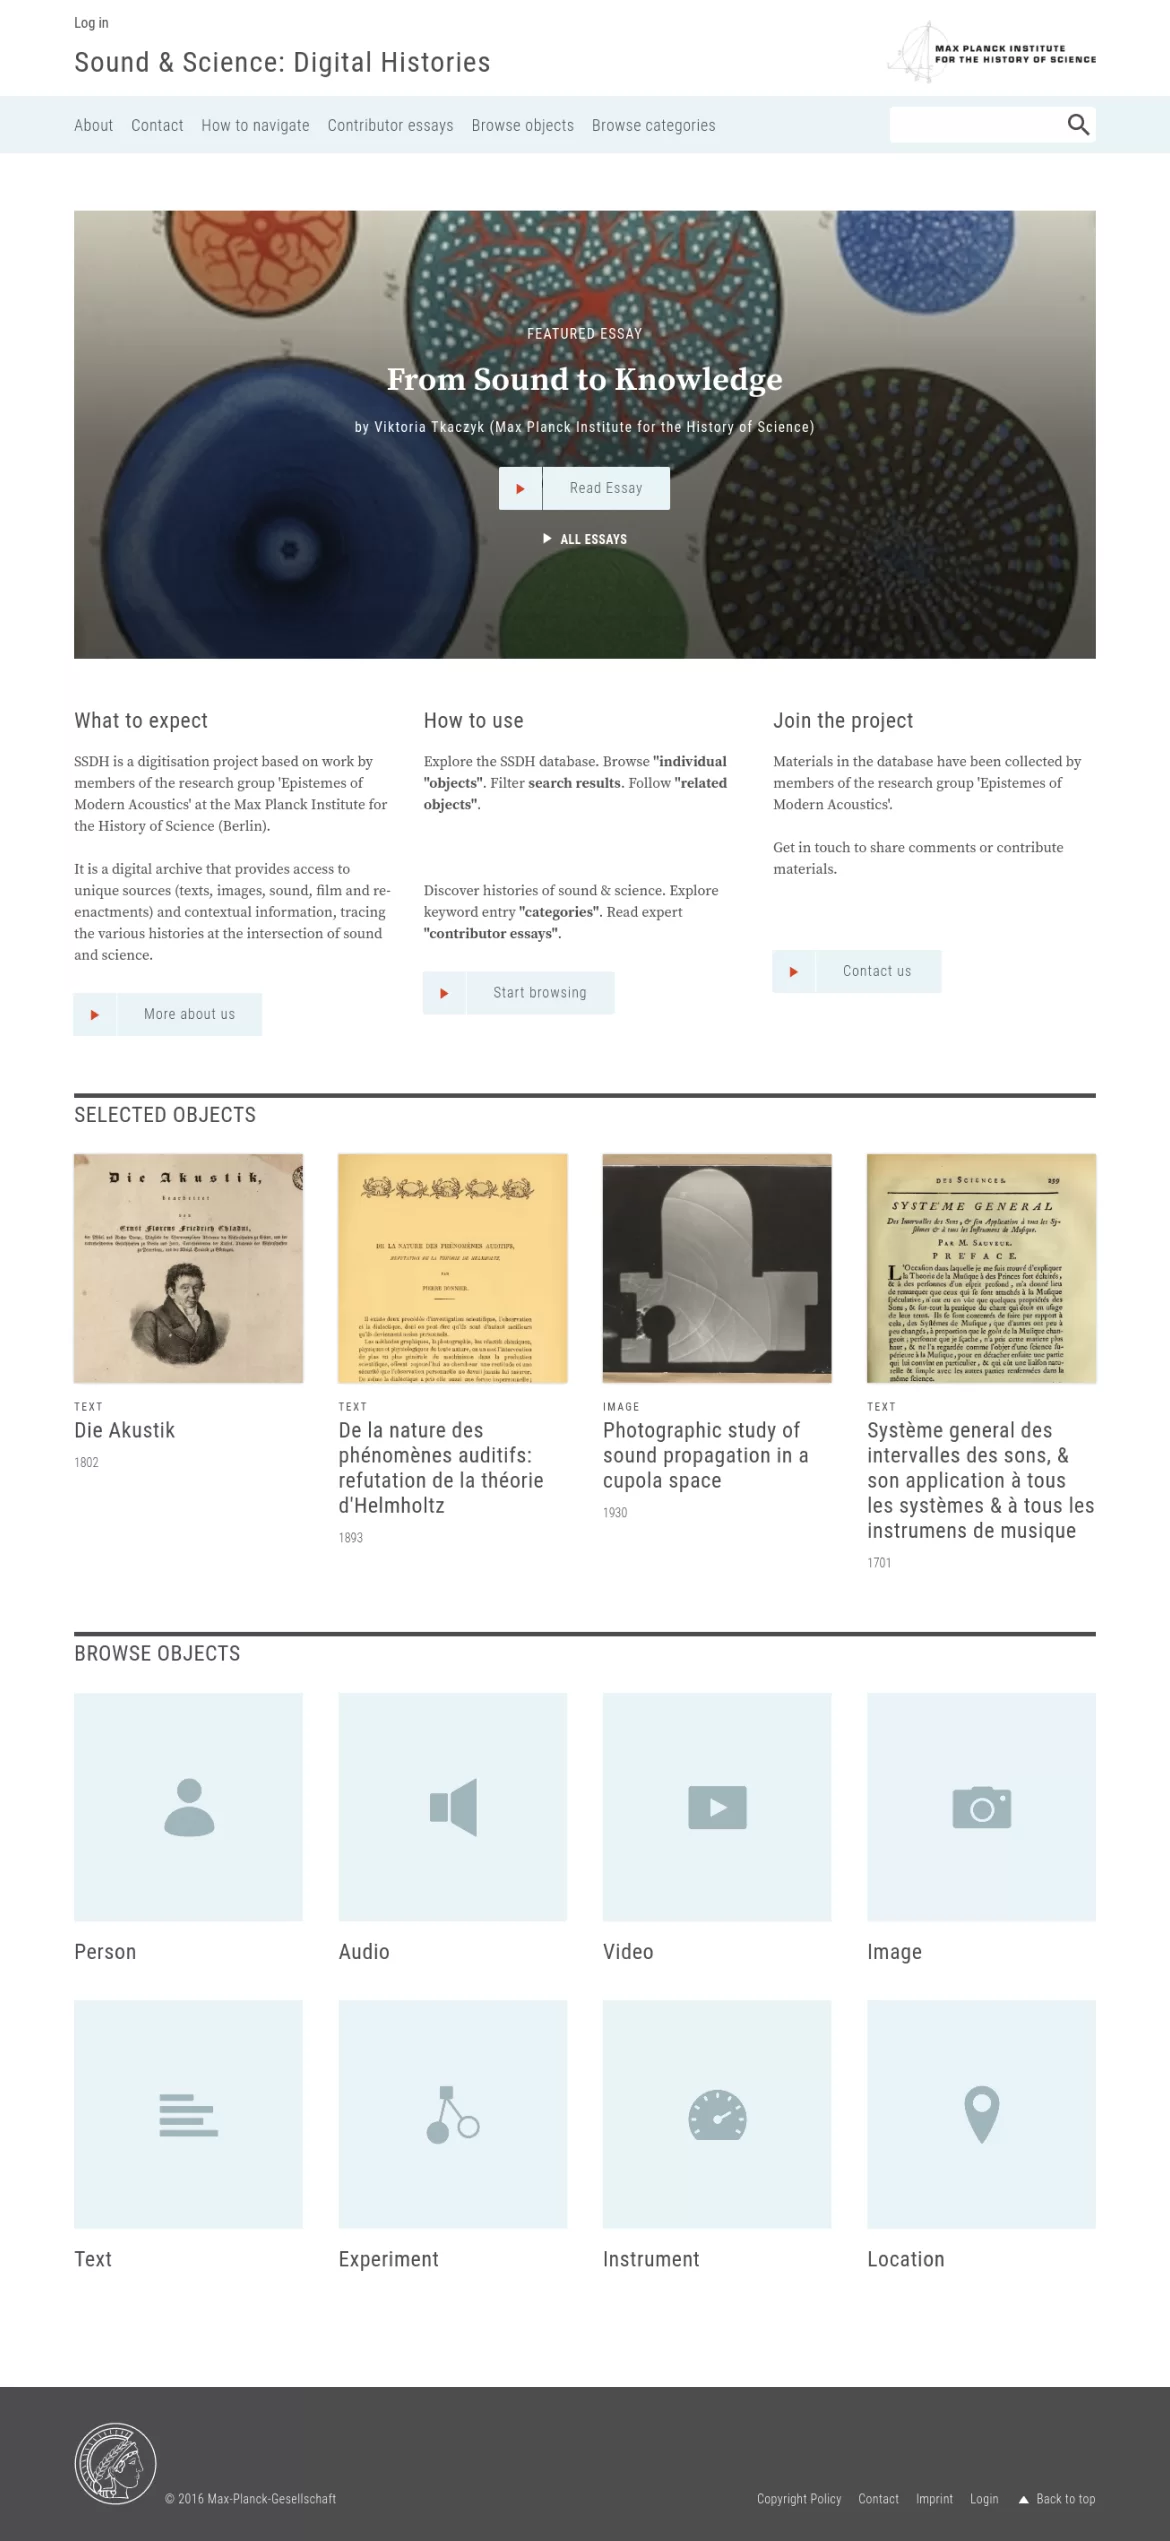 Sound & Science: Digital Histories Home Page